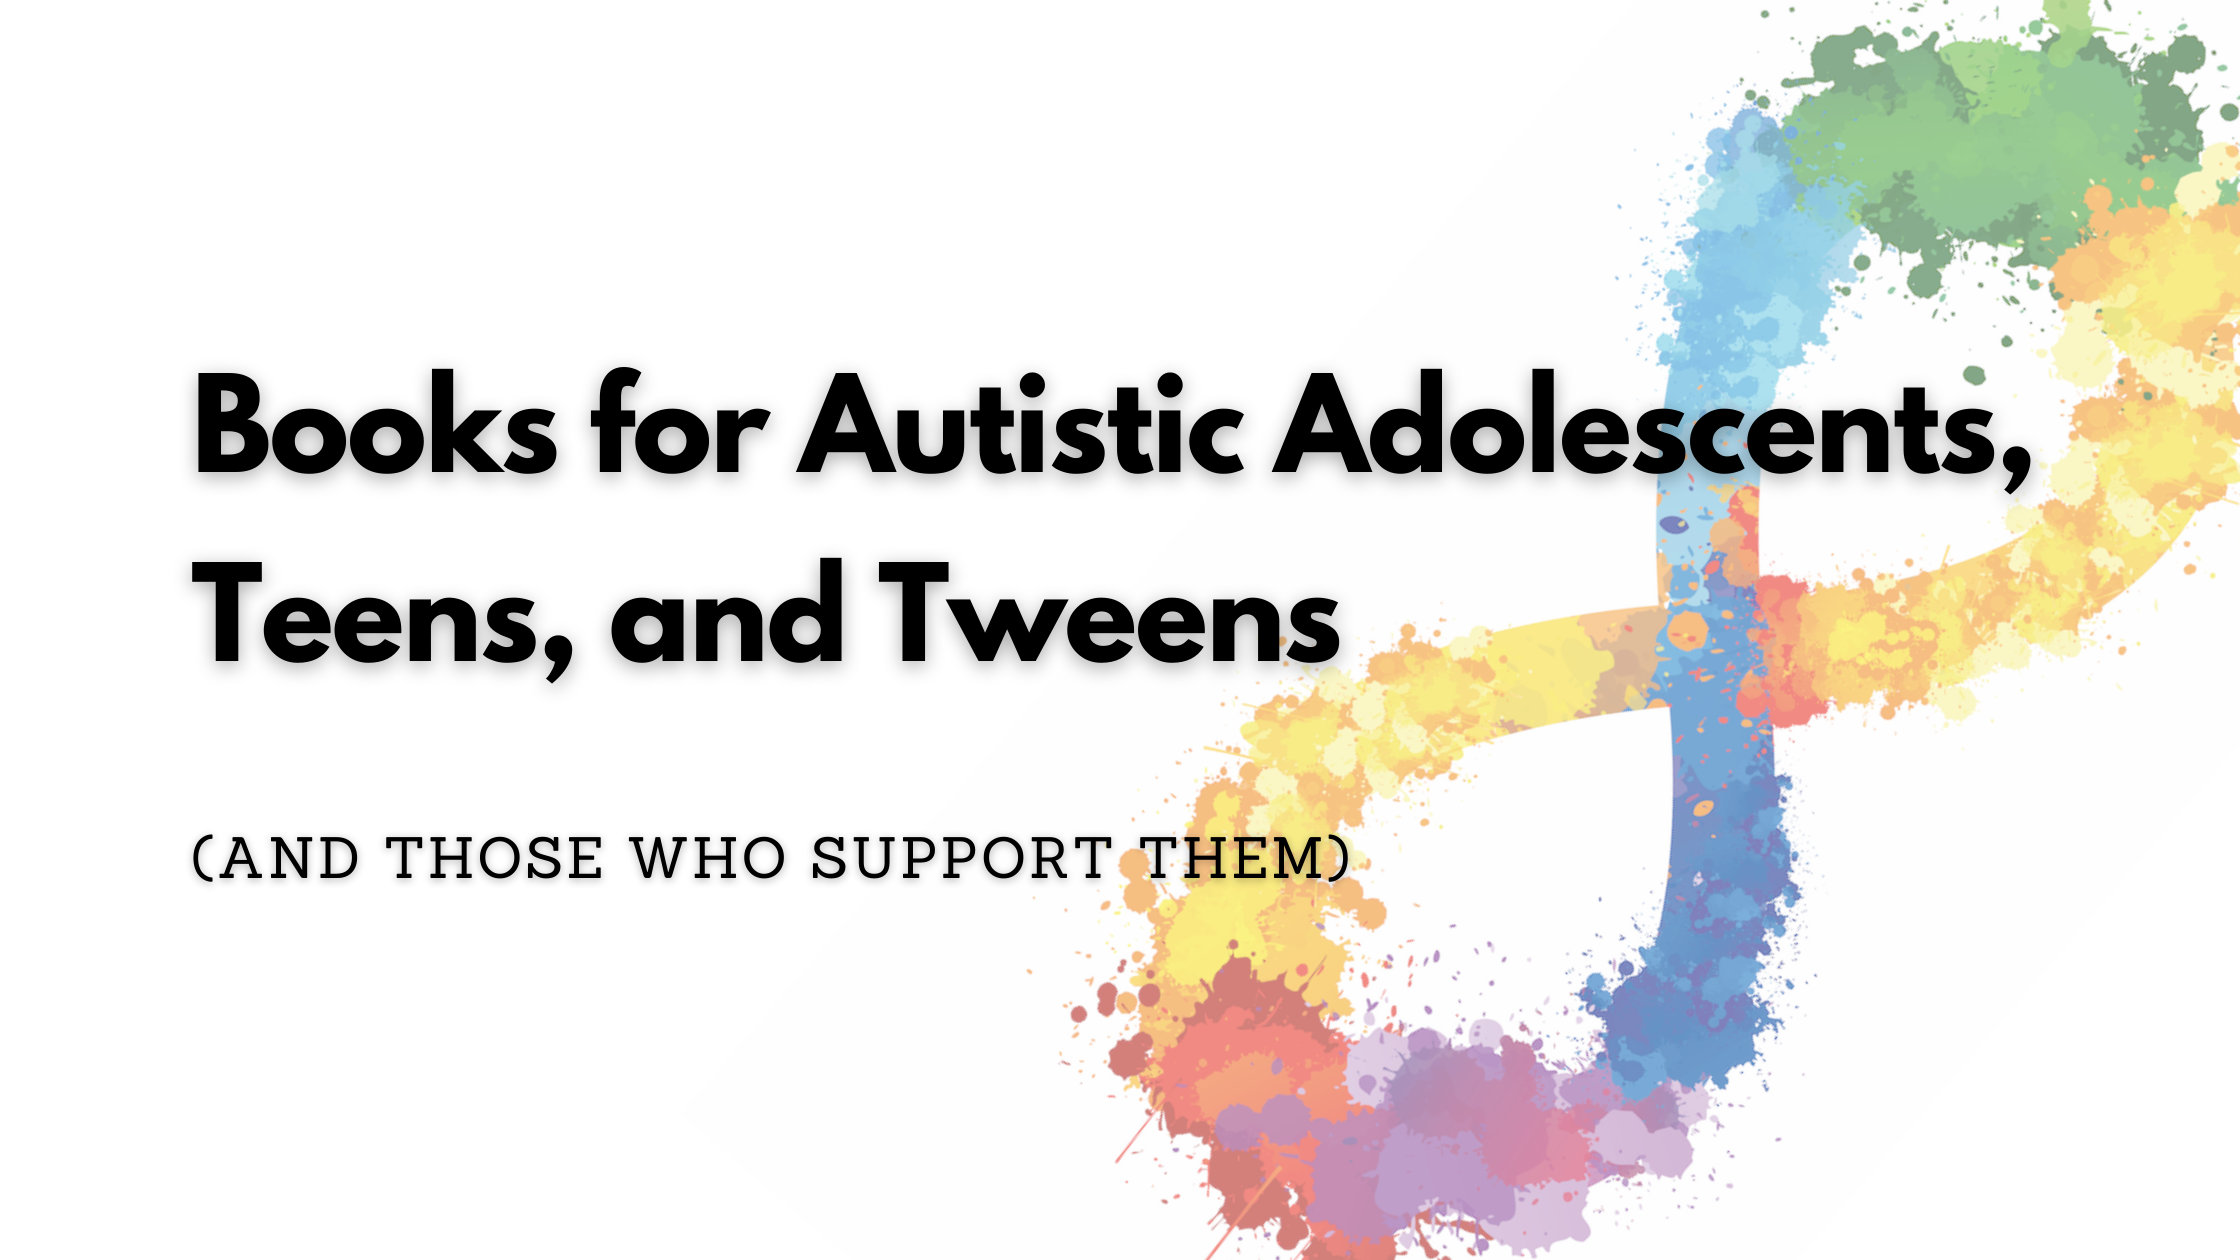 100-ish Books for Autistic Adolescents, Teens, and Tweens